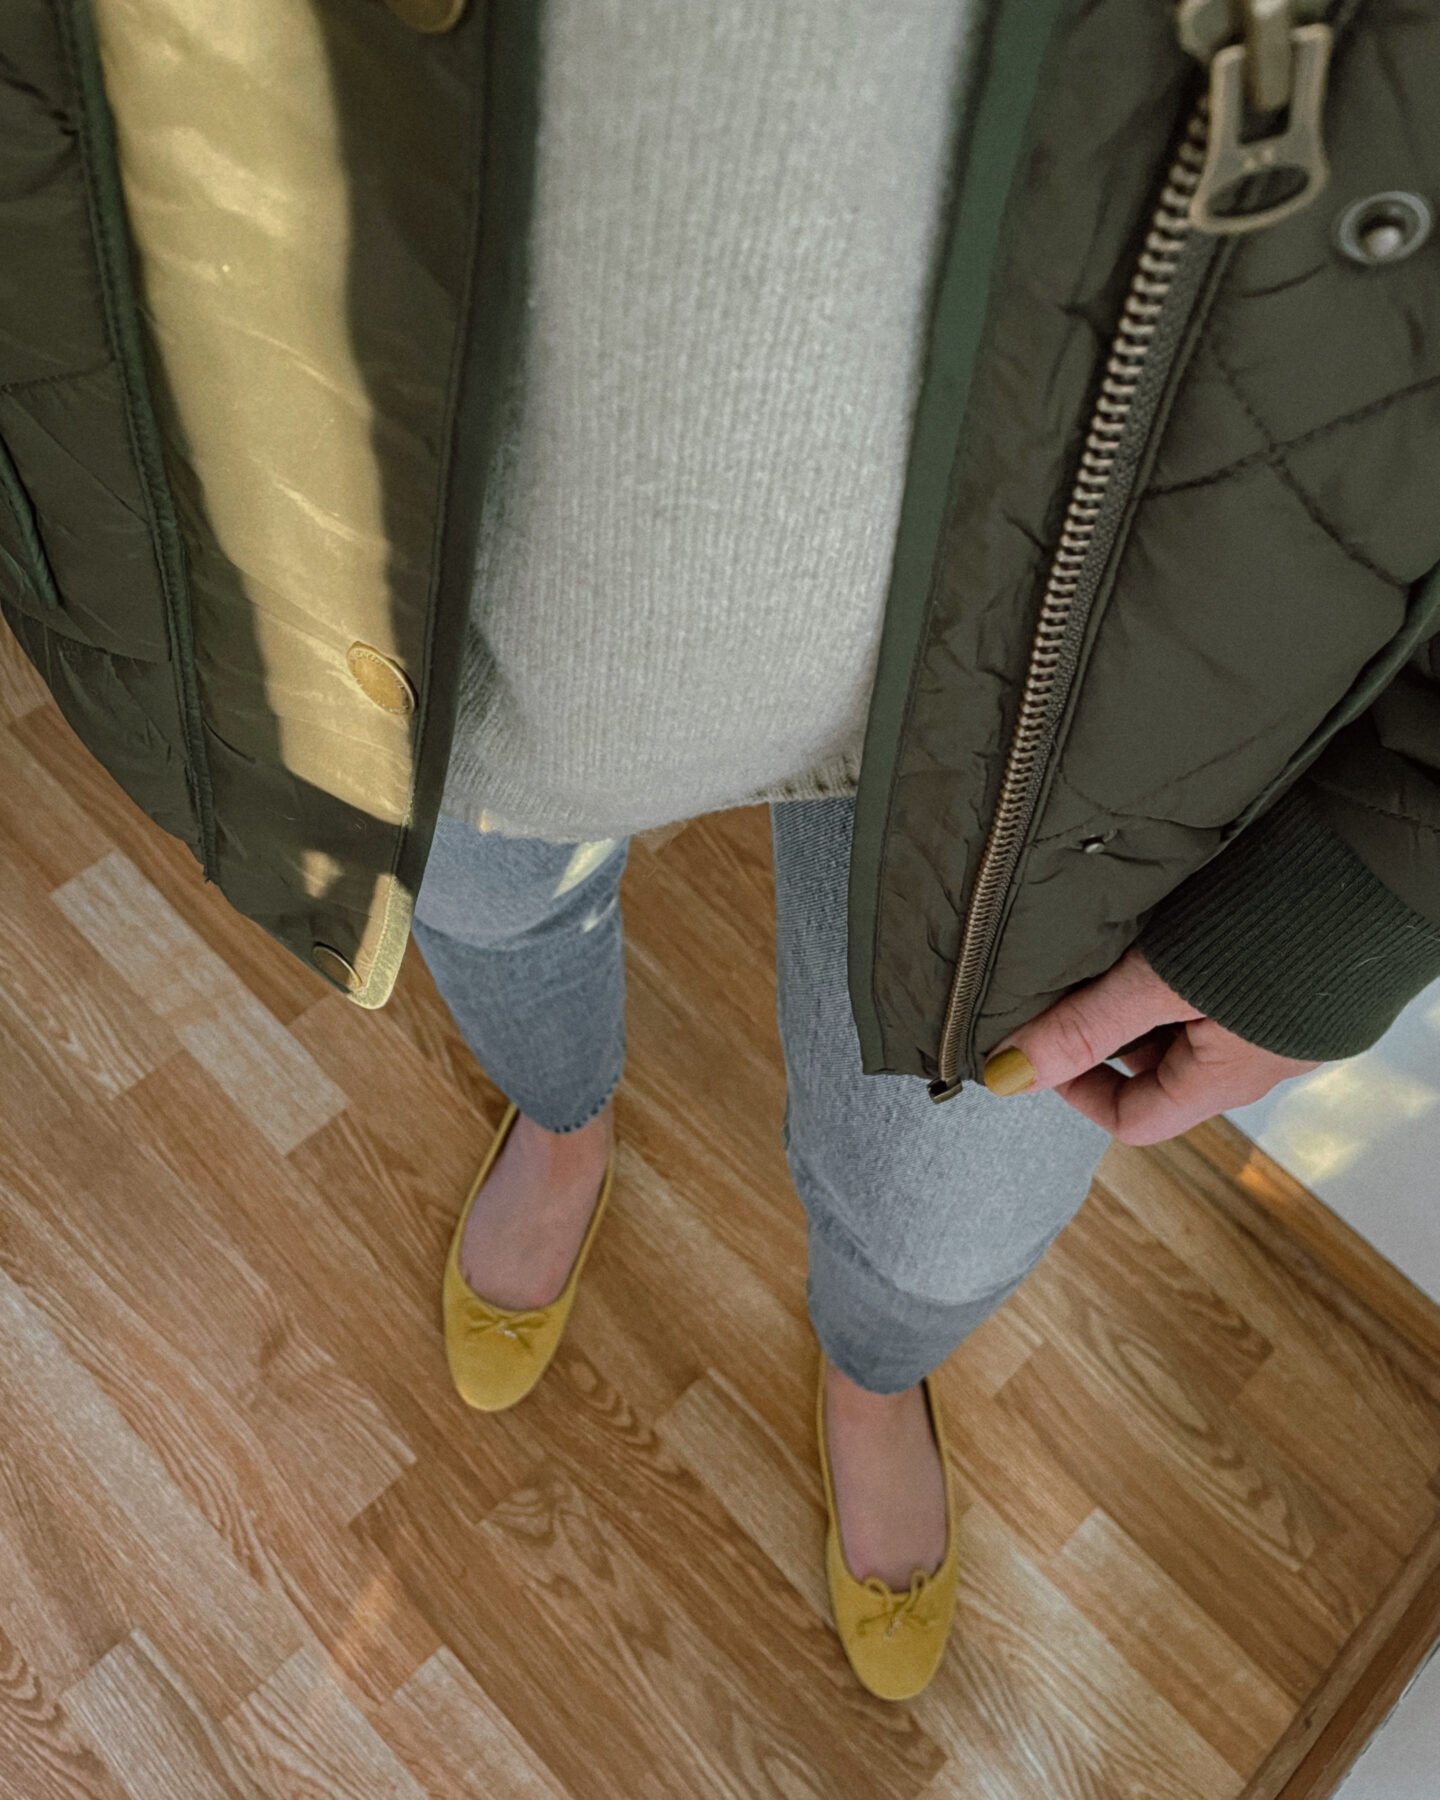 Karin Emily wears a sage green sweater, olive green shirt jacket, light wash straight leg jeans, and yellow ballet flat